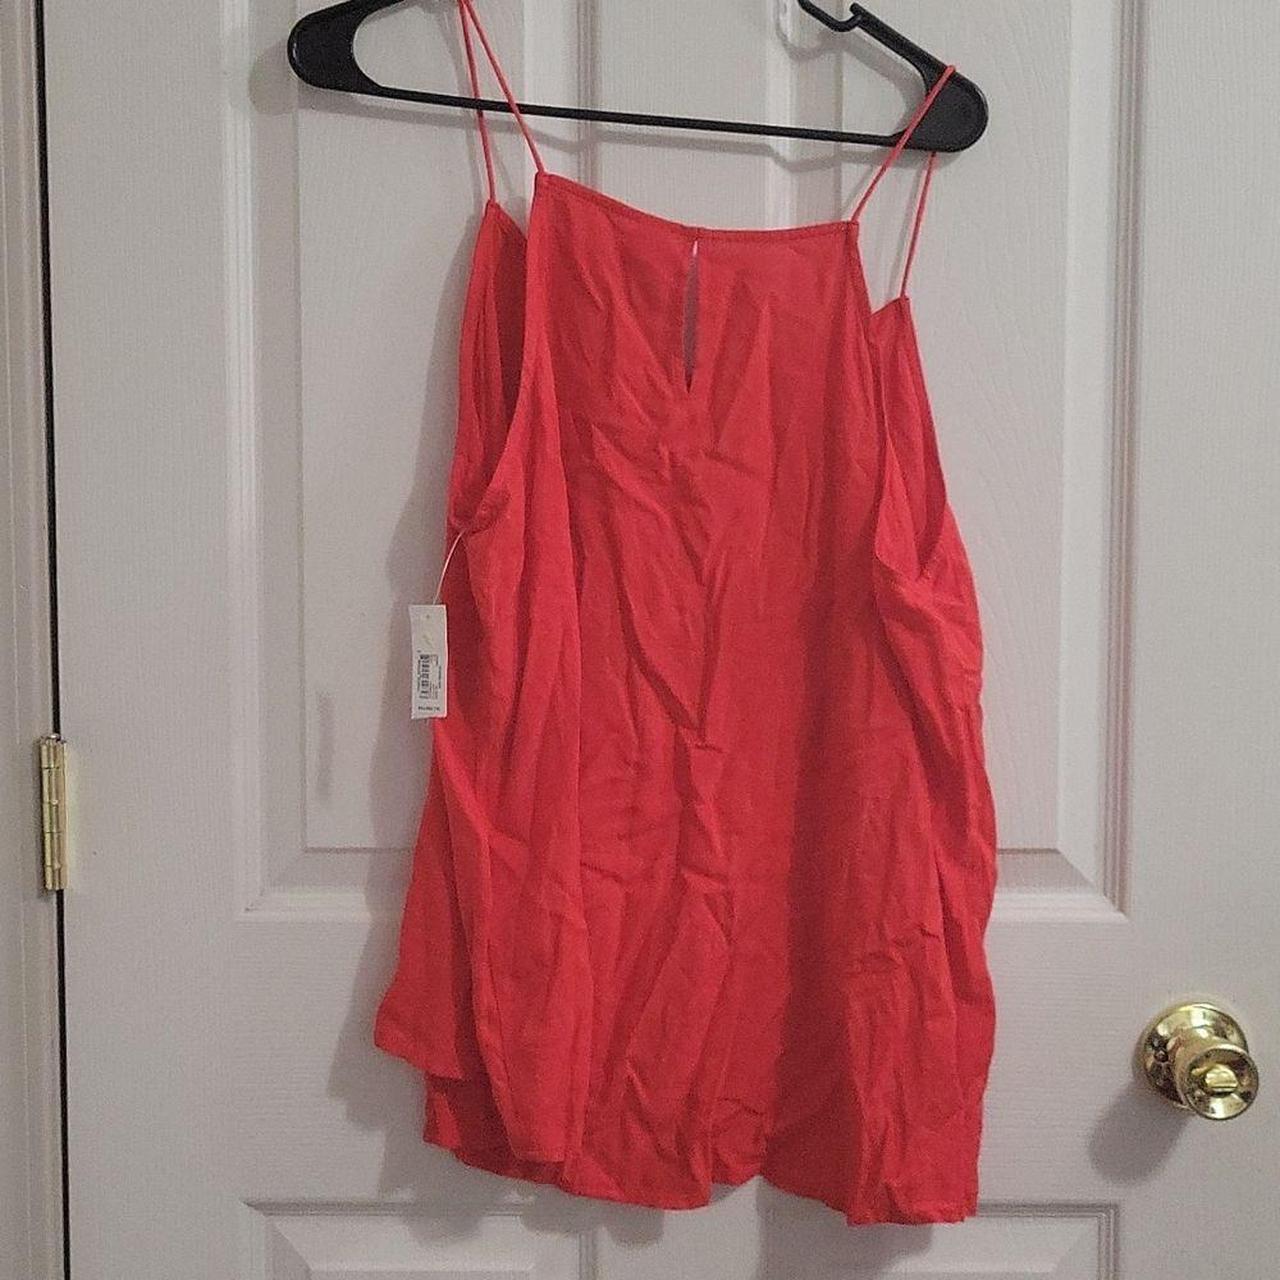 Product Image 2 - Brand: 	No Boundaries
Color: 	Red
Style: 	Tank